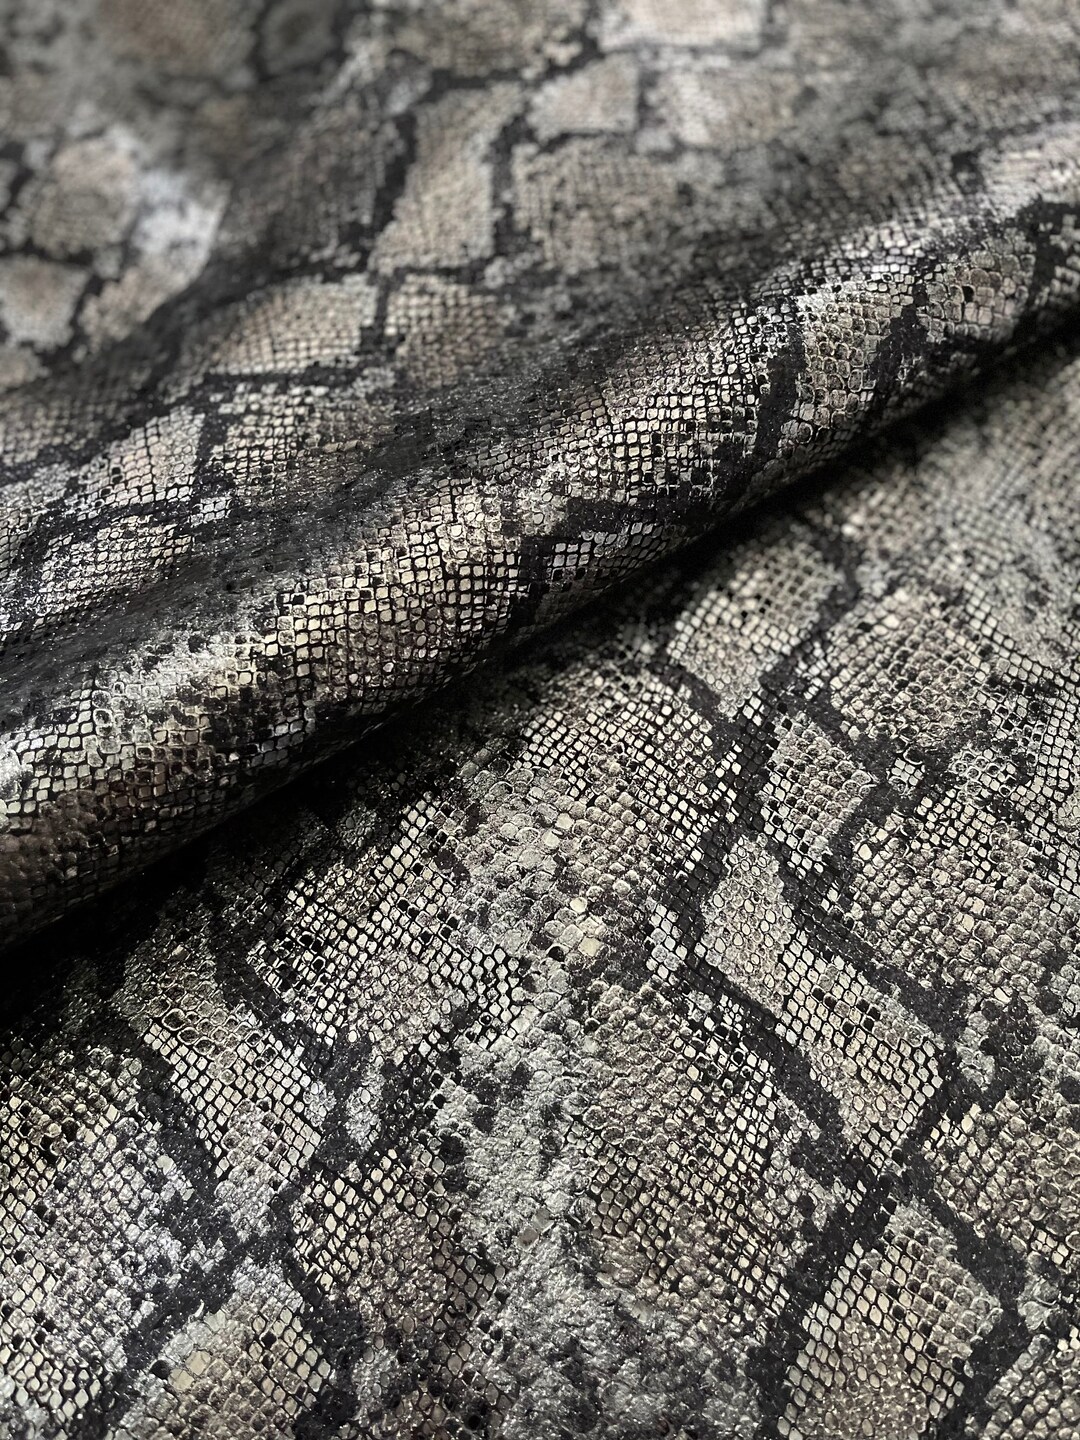 Metallic Silver and Black Snake Print Leather, Genuine Leather Sheets ...